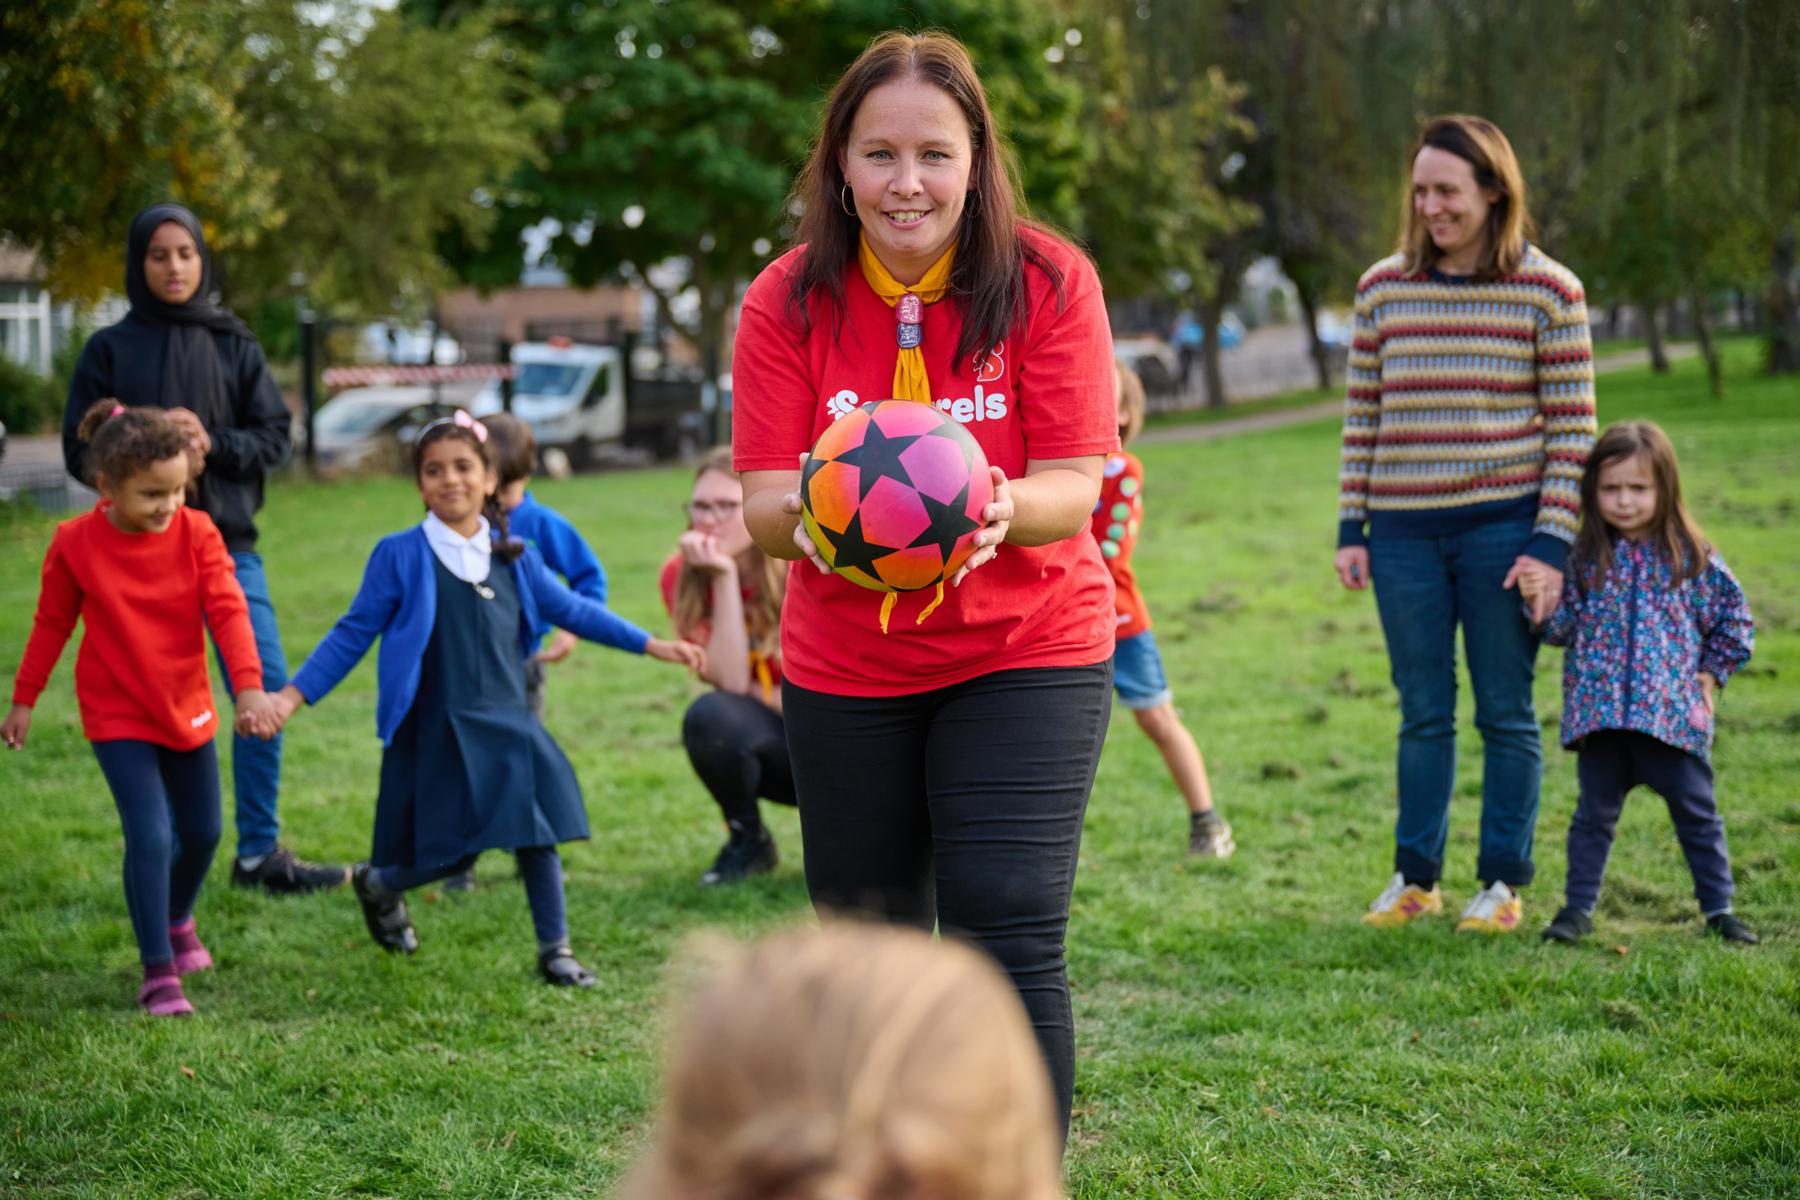 A volunteer wearing a red Squirrels t-shirt holds a ball in their hands while standing in a park with a group of young people.